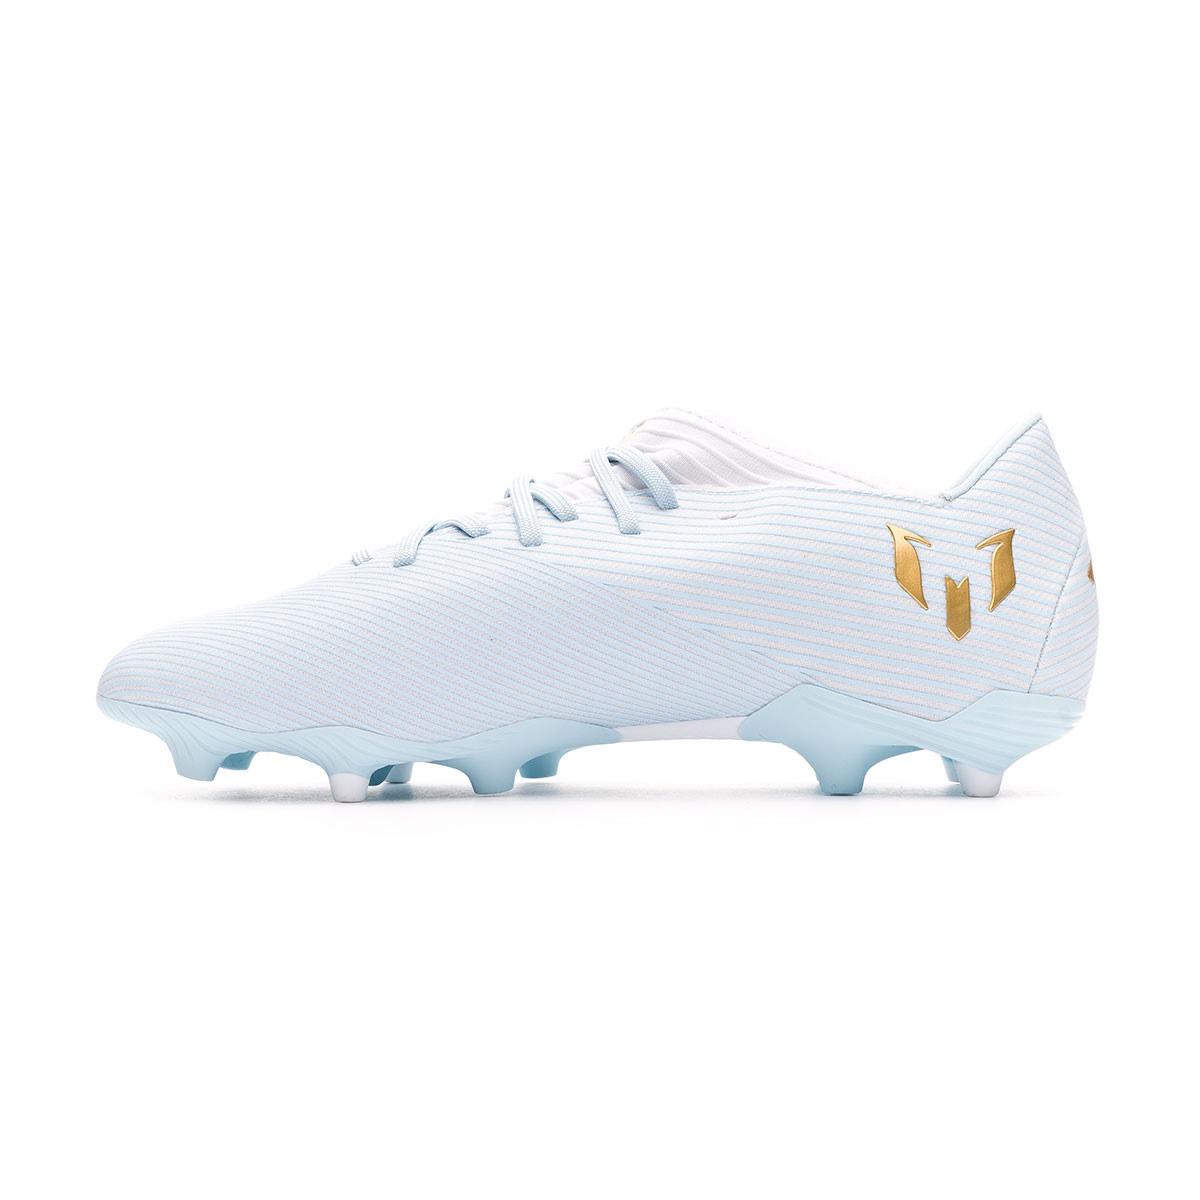 football shoes under 15